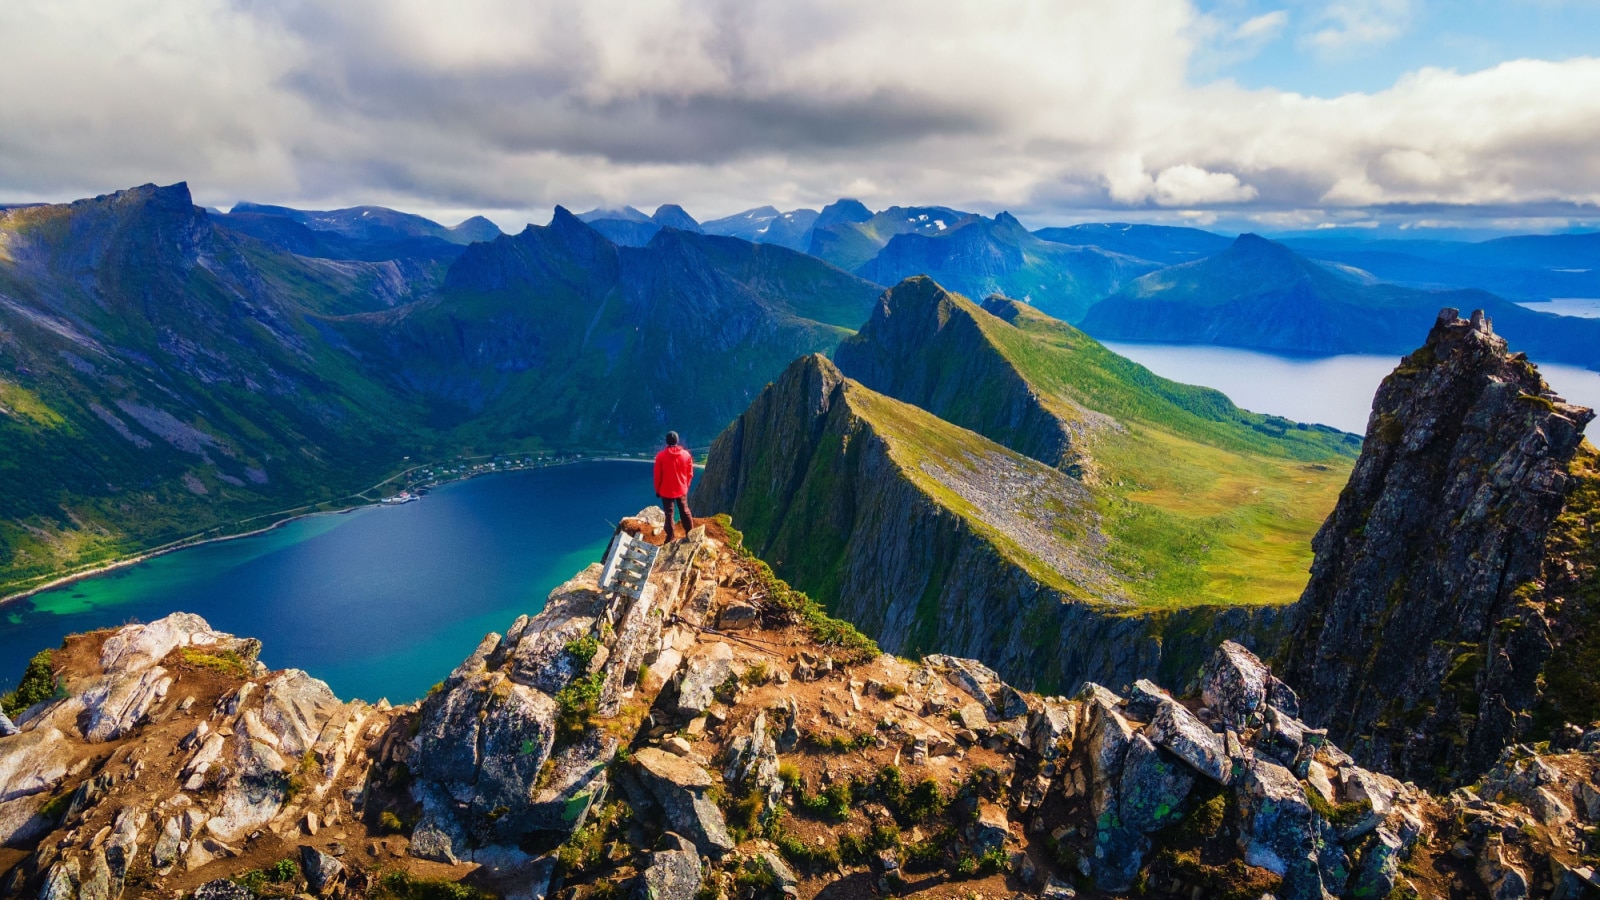 Hiker standing on the top of Husfjellet Mountain on Senja Island in northern Norway and enjoying spectacular views over surrounding fjords and mountains.